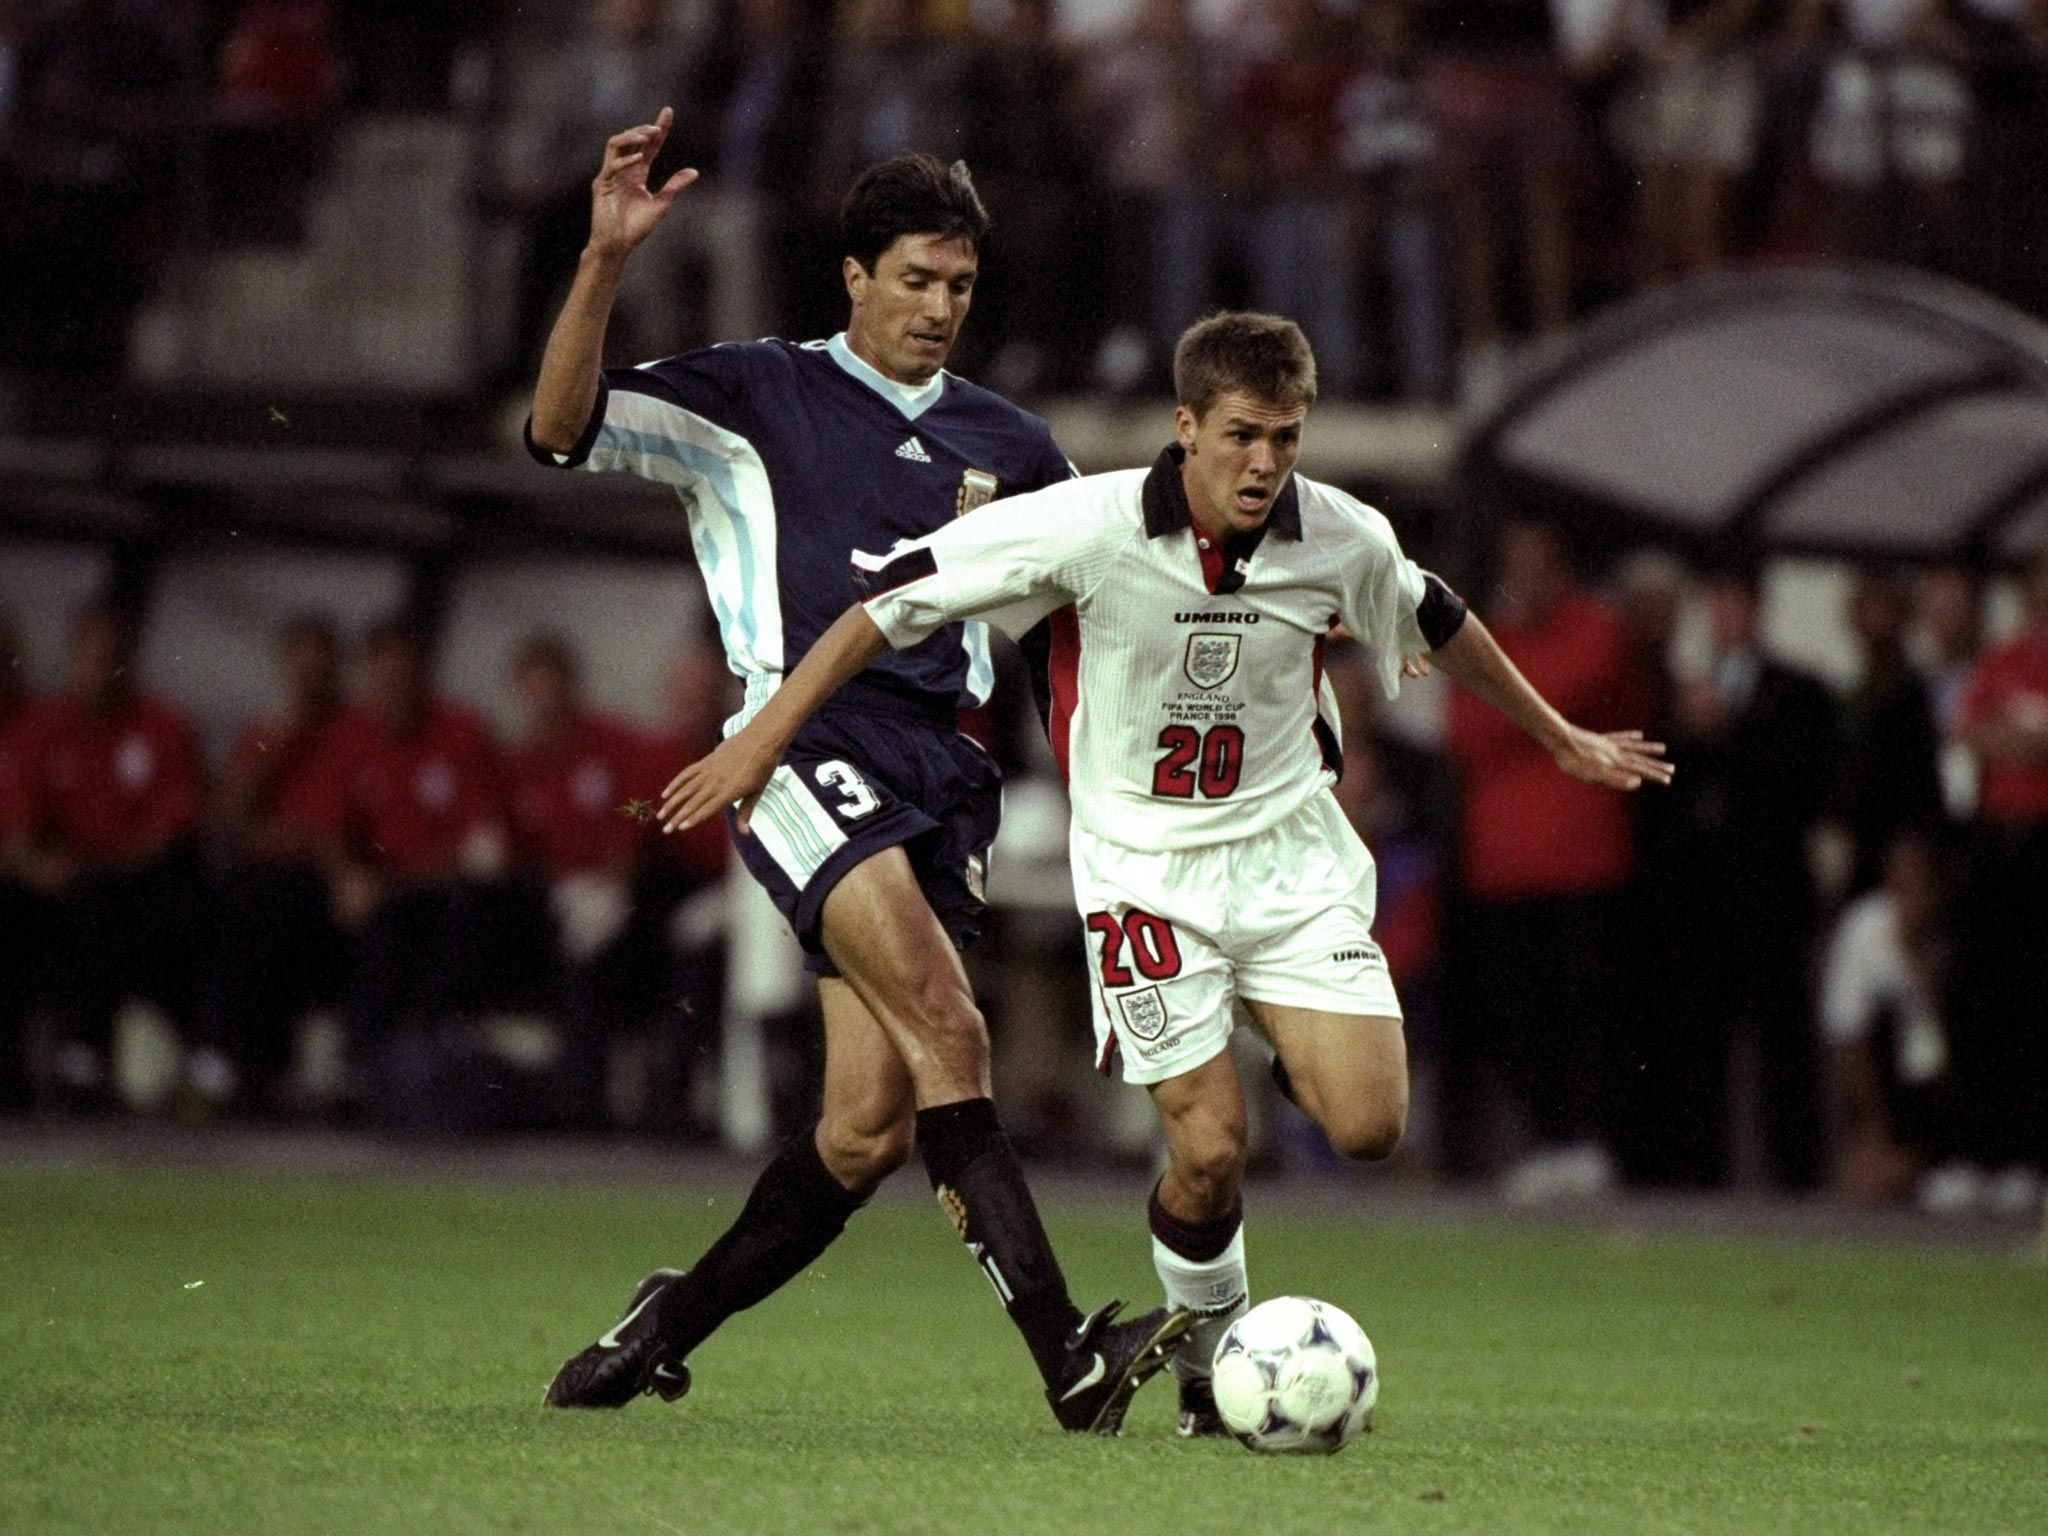 Michael Owen's goal against Argentina in 1998 has gone down as one of England's greatest ever World Cup goals